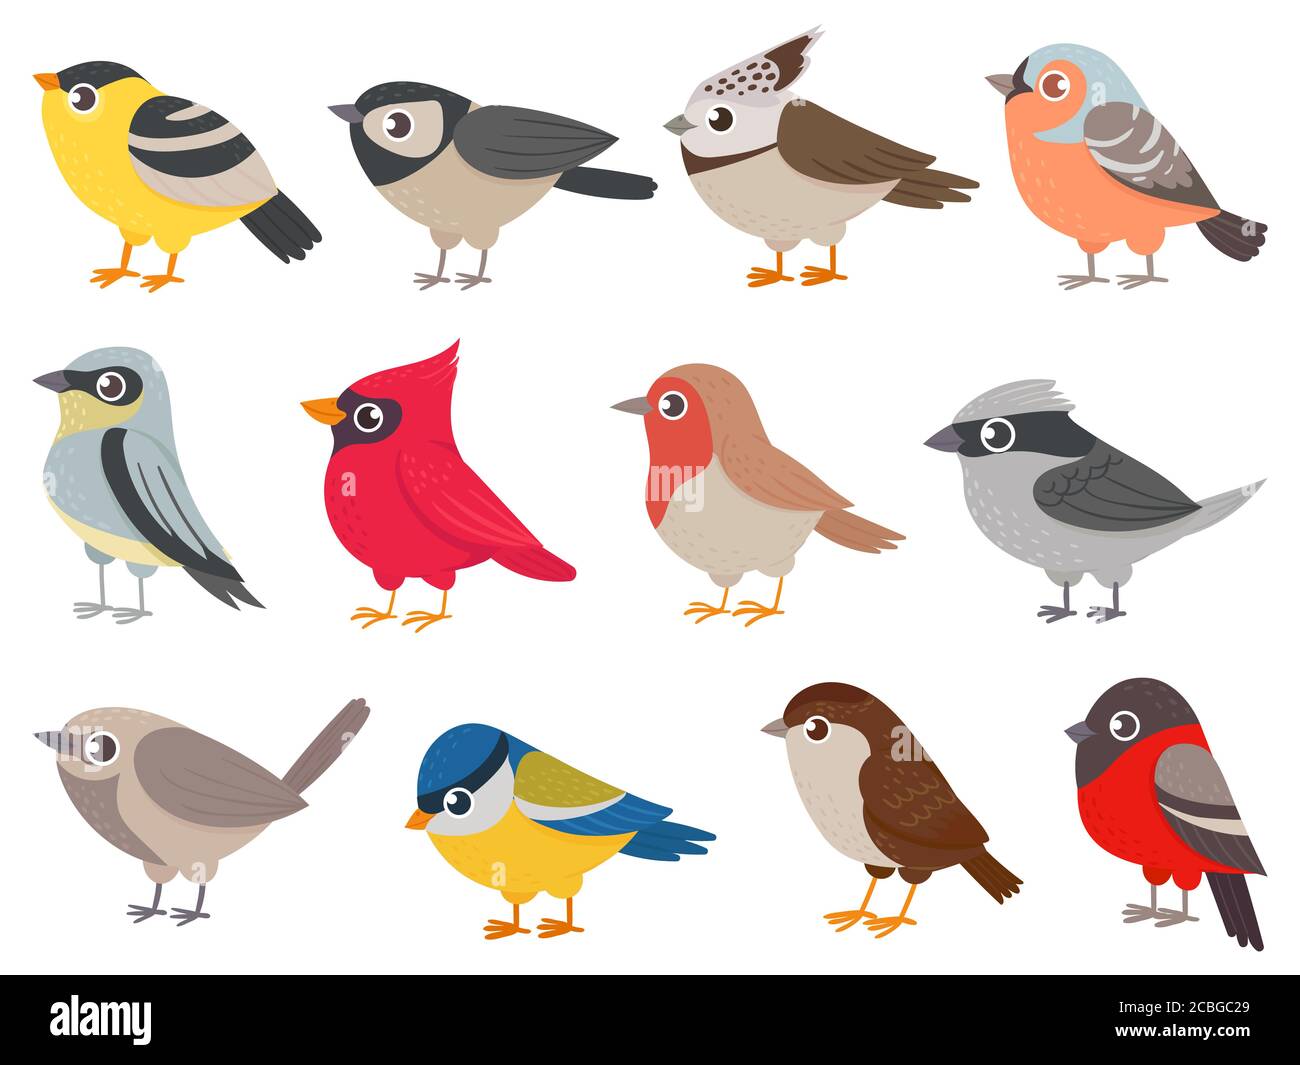 Cute birds. Hand drawn little colorful birds, animals characters ...